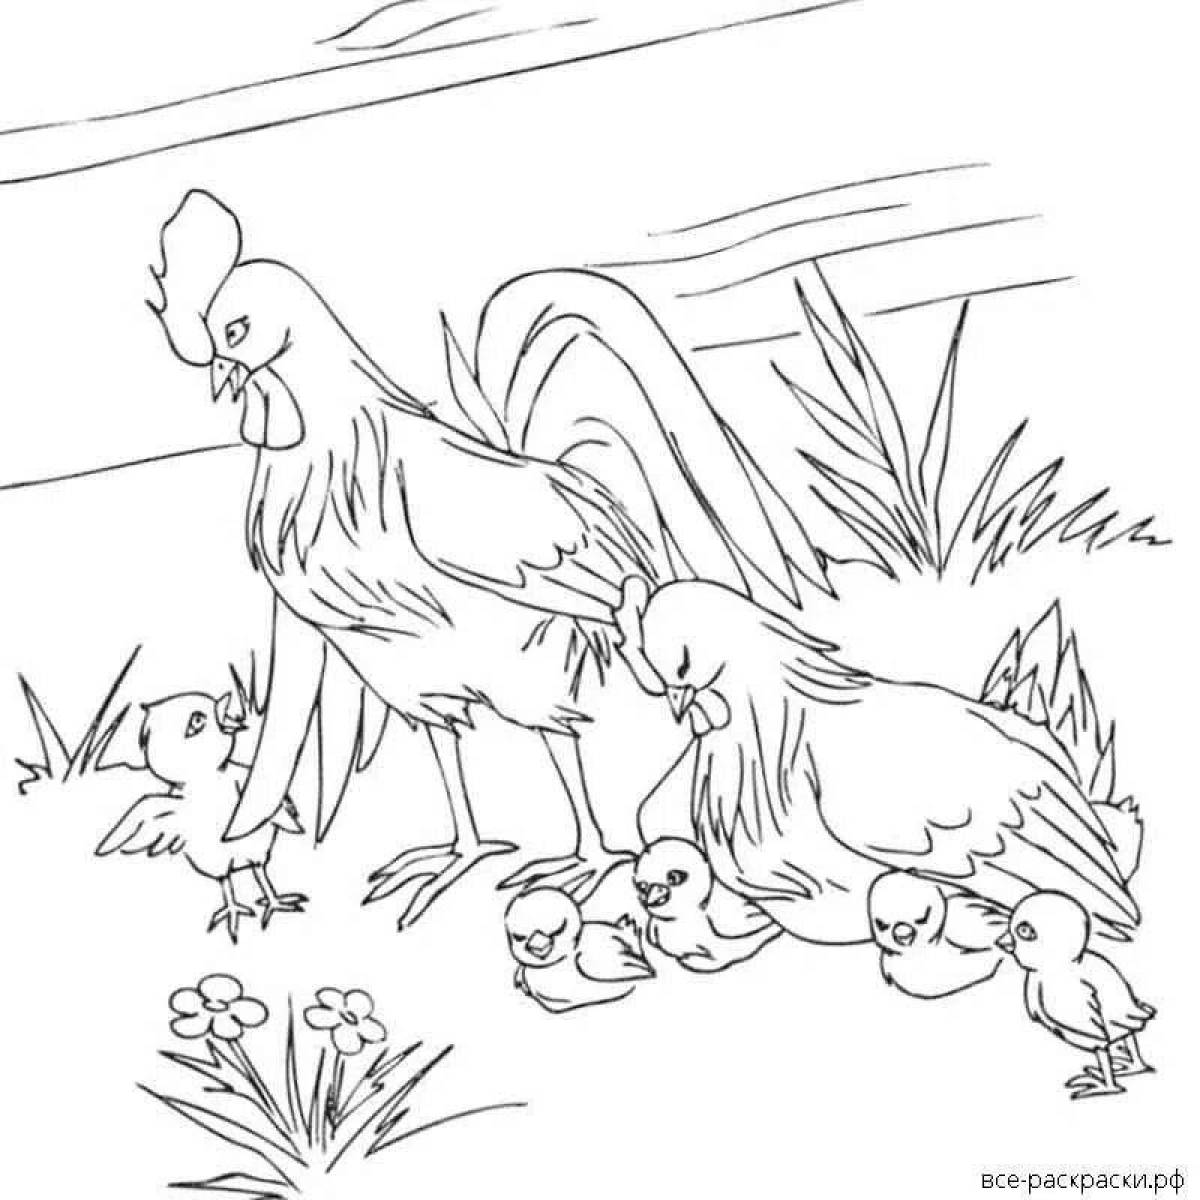 Rooster and hen #5